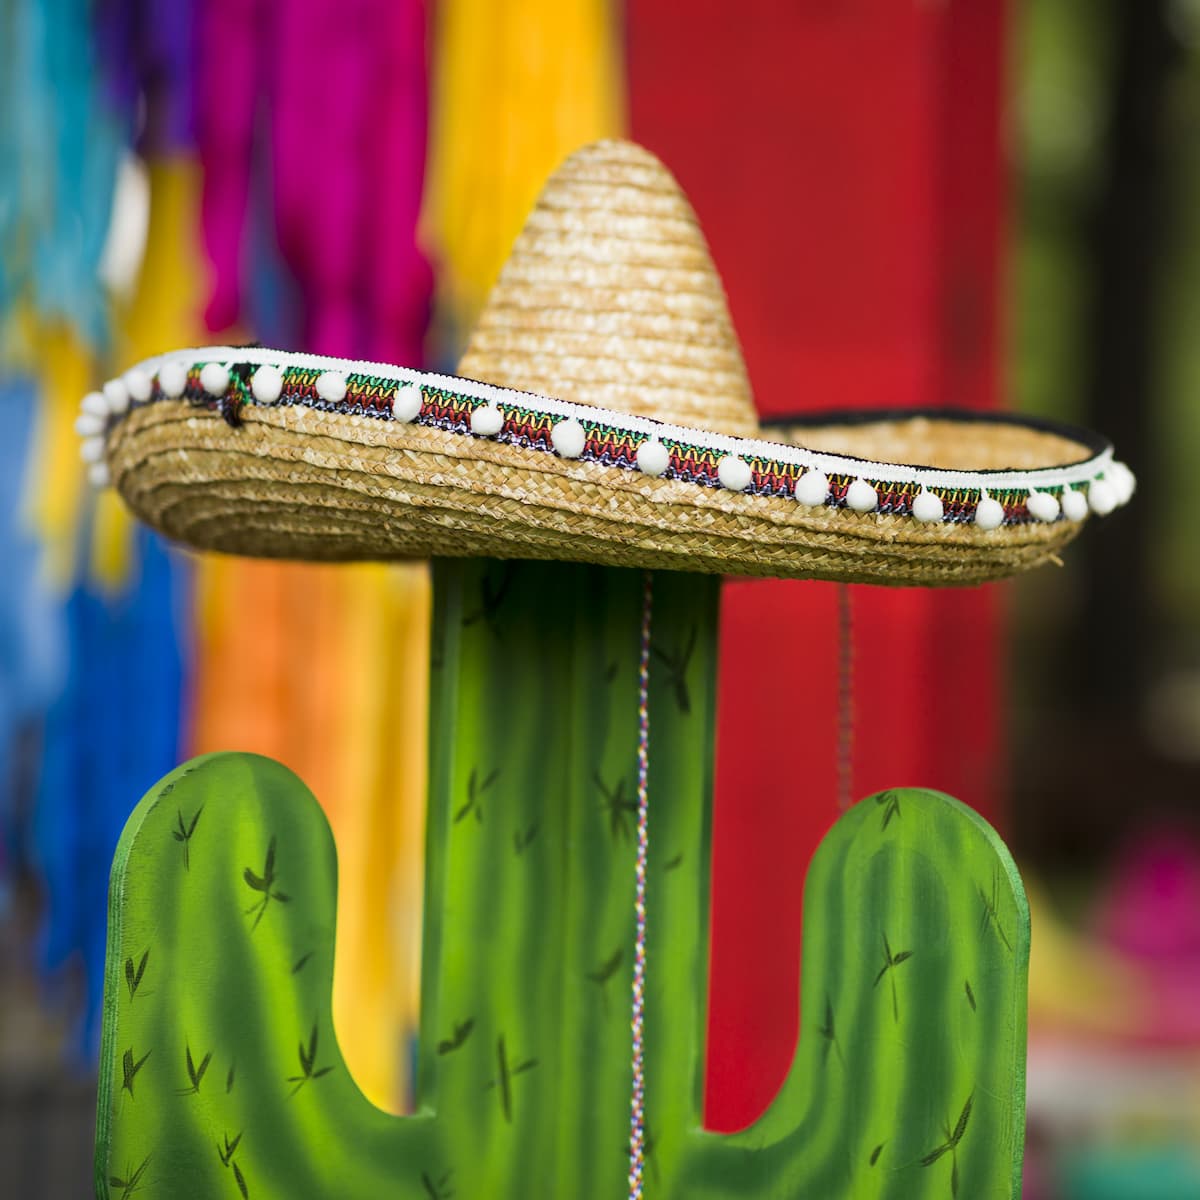 An image of a wooden painted cactus wearing a sombrero.